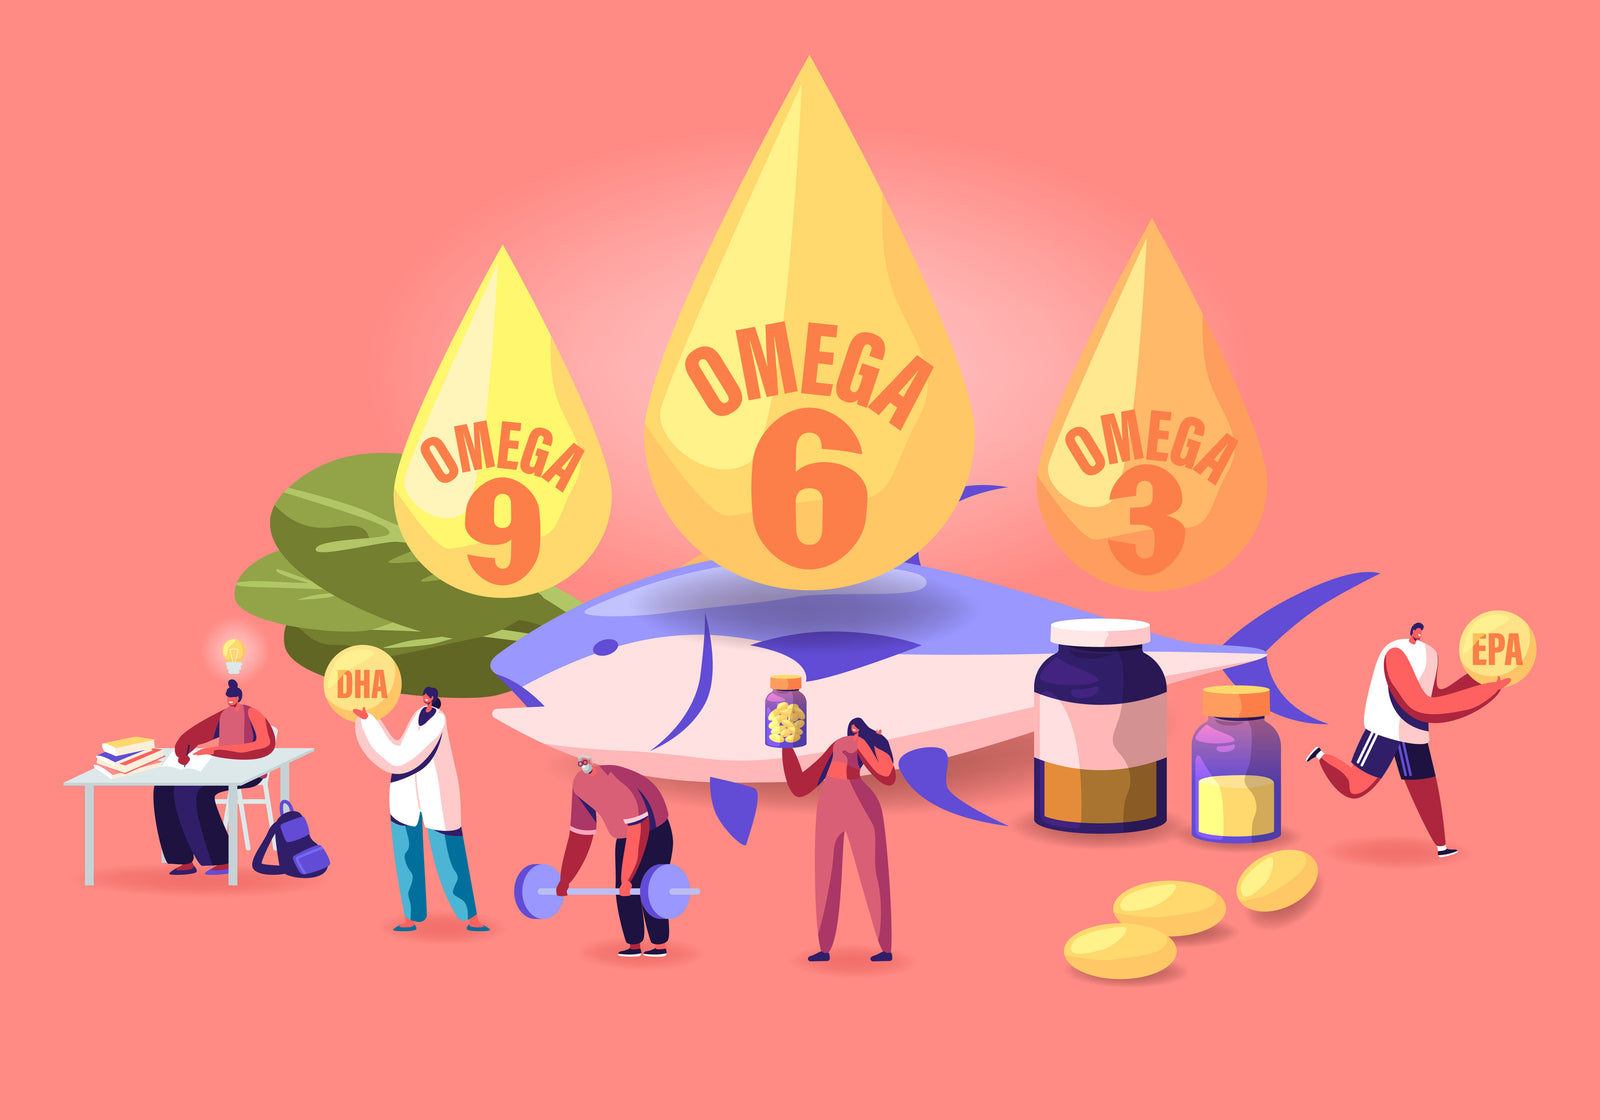 What Are The Differences Between Omega-3, 6 And 9?